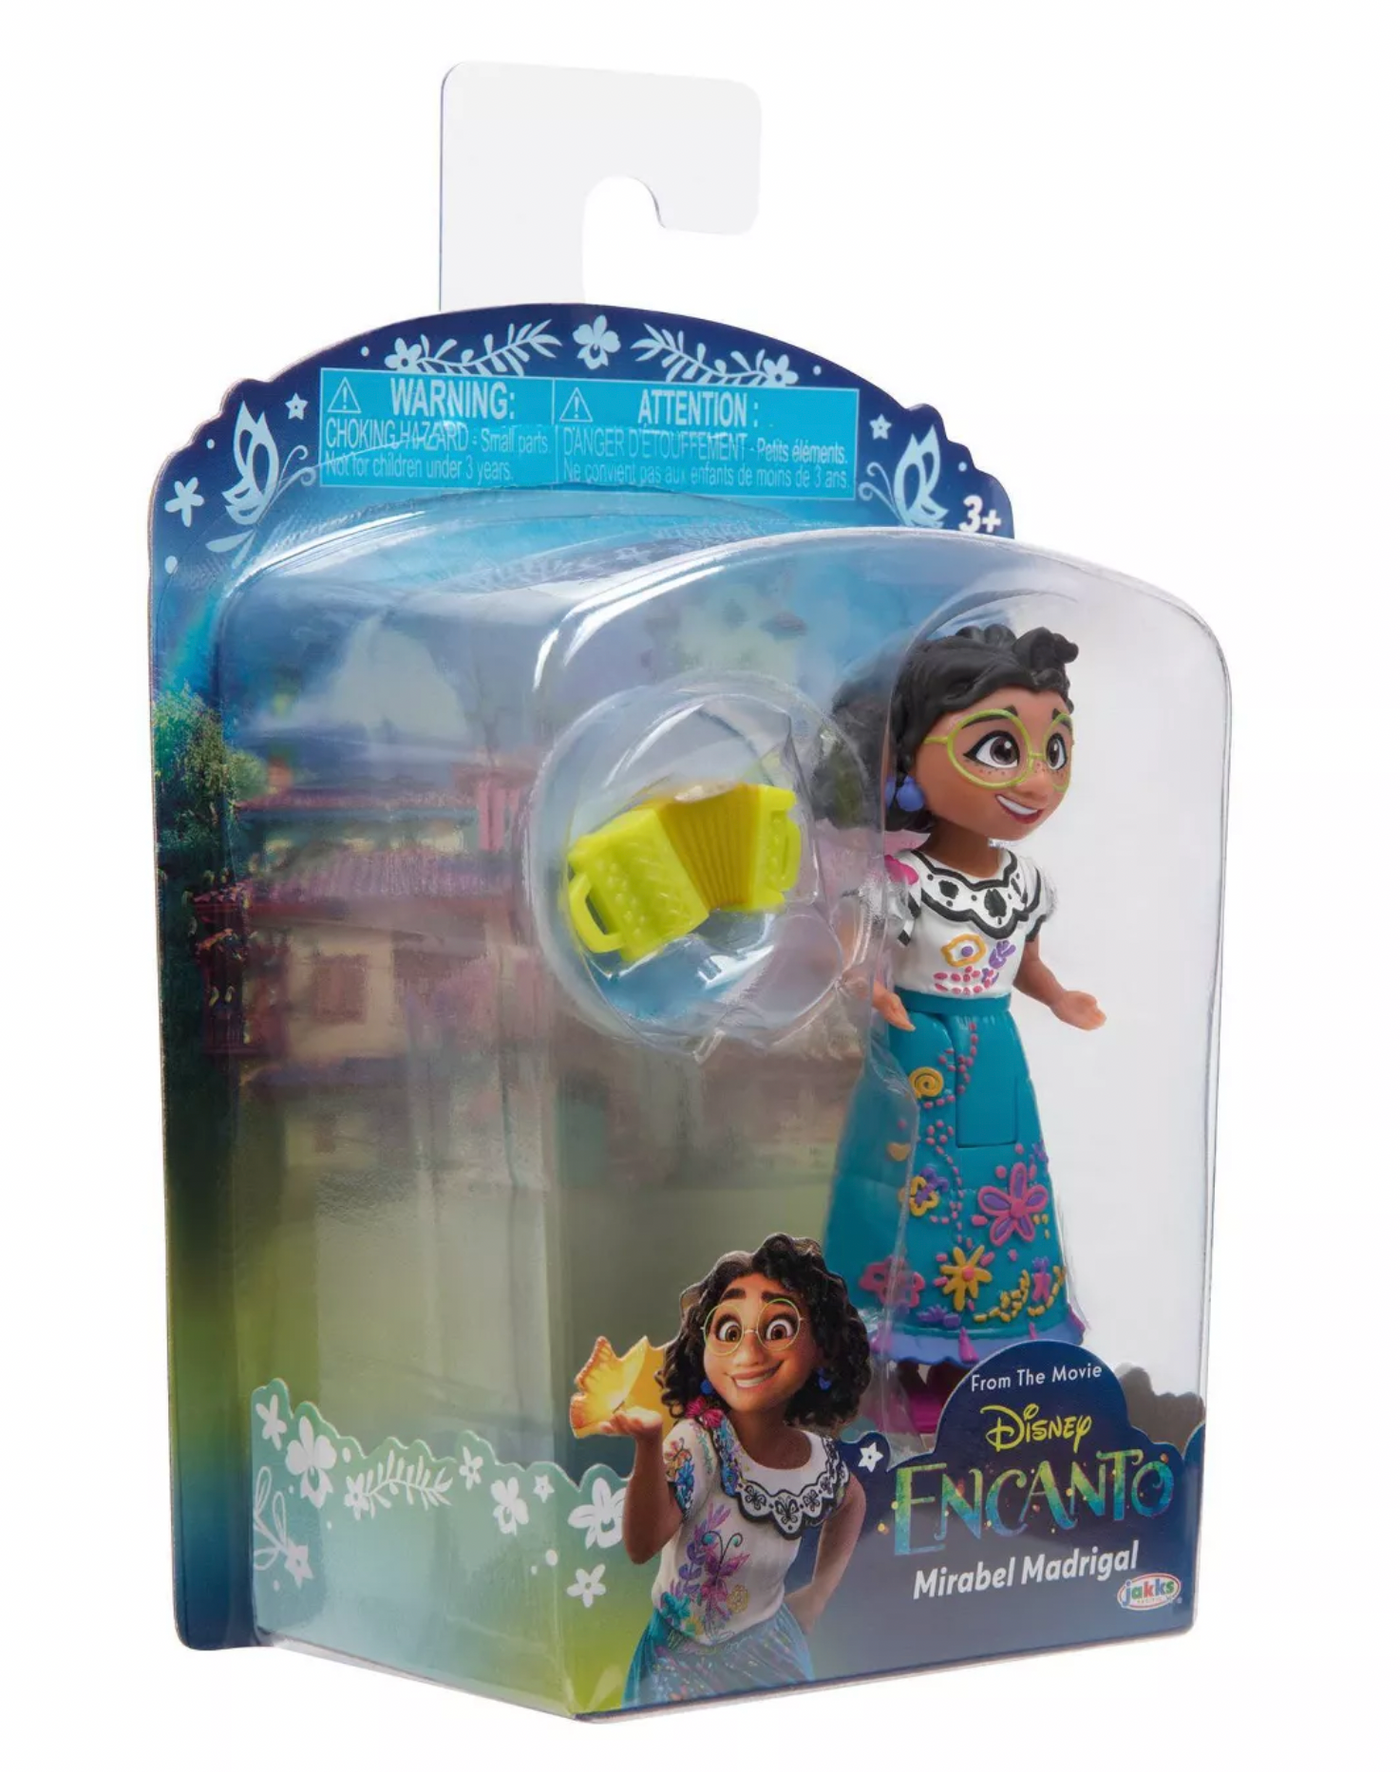 Disney Encanto Mirabel Madrigal Small Doll Toy New with Box